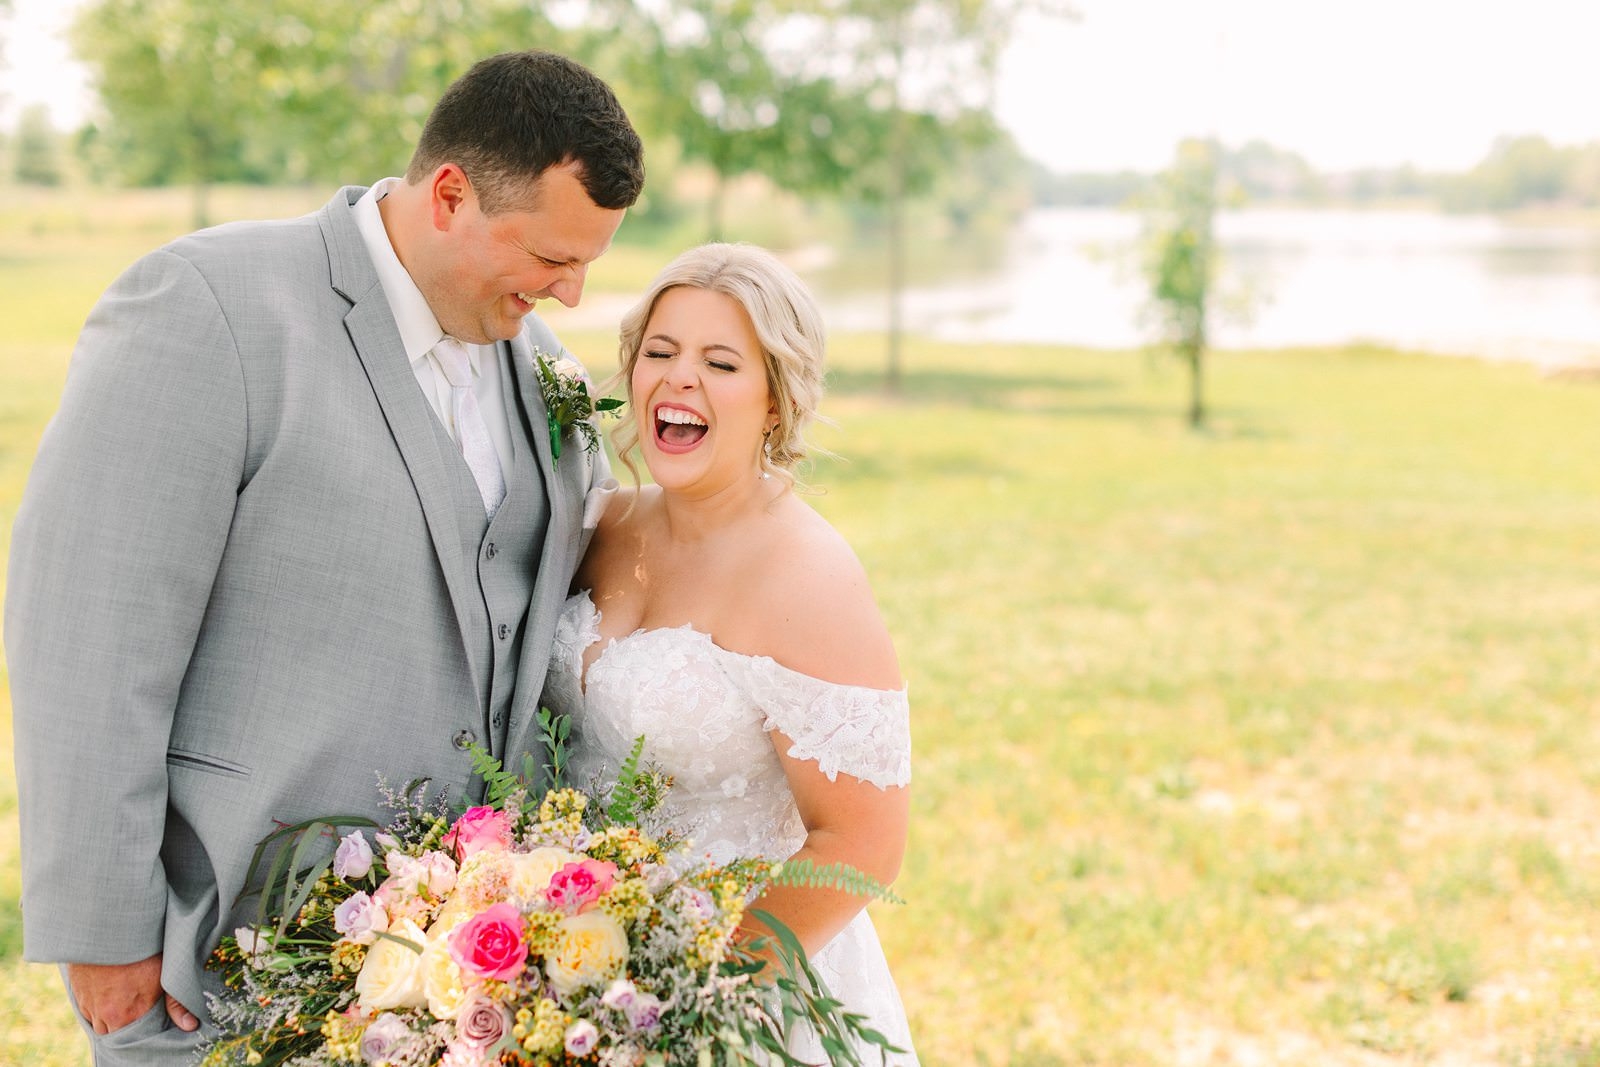 A Sunny Summer Wedding at Friedman Park in Newburgh Indiana | Paige and Dylan | Bret and Brandie Photography075.jpg